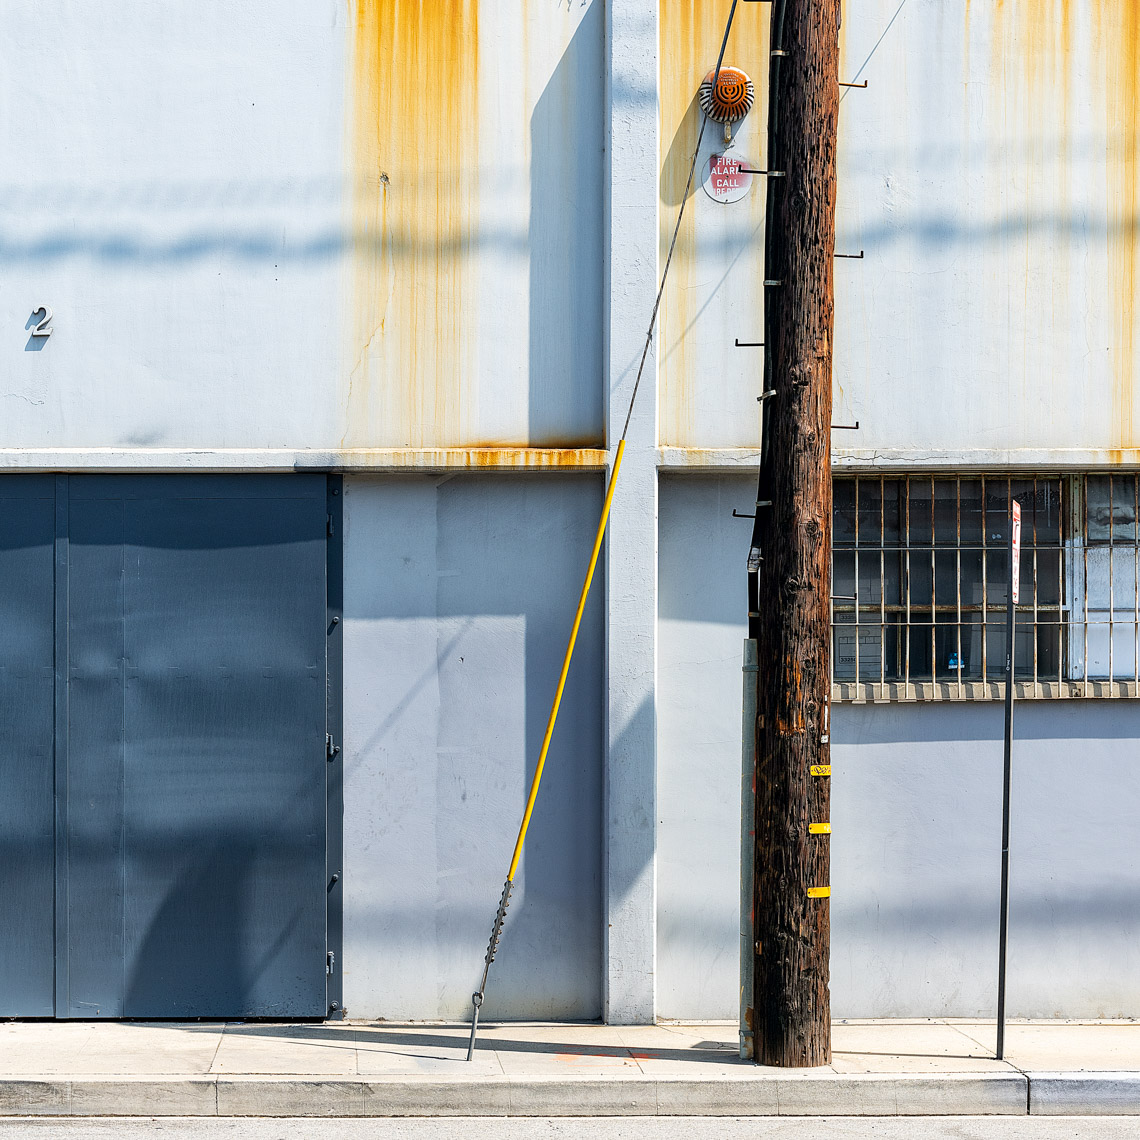 mattvacca_los_angeles_abstract_photography_urban-3536-Edit--2